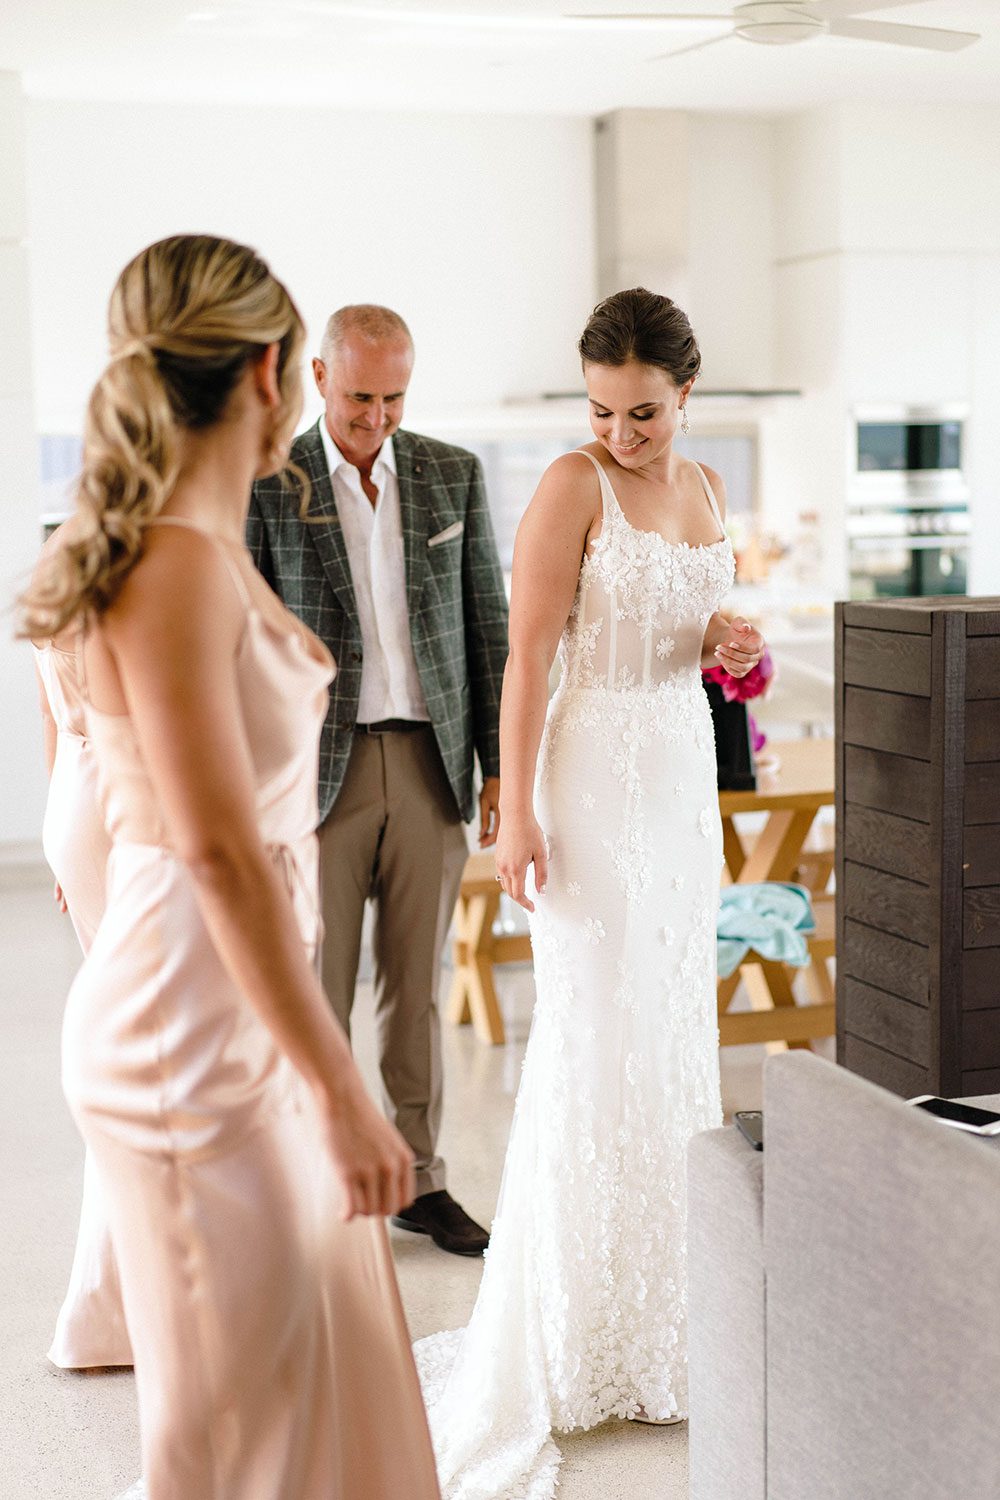 Bride wears bespoke E'More lace gown with boned bodice with hand beaded flower applique and full lace train by Auckland wedding dress maker Vinka designs - getting ready with bridesmaid and family